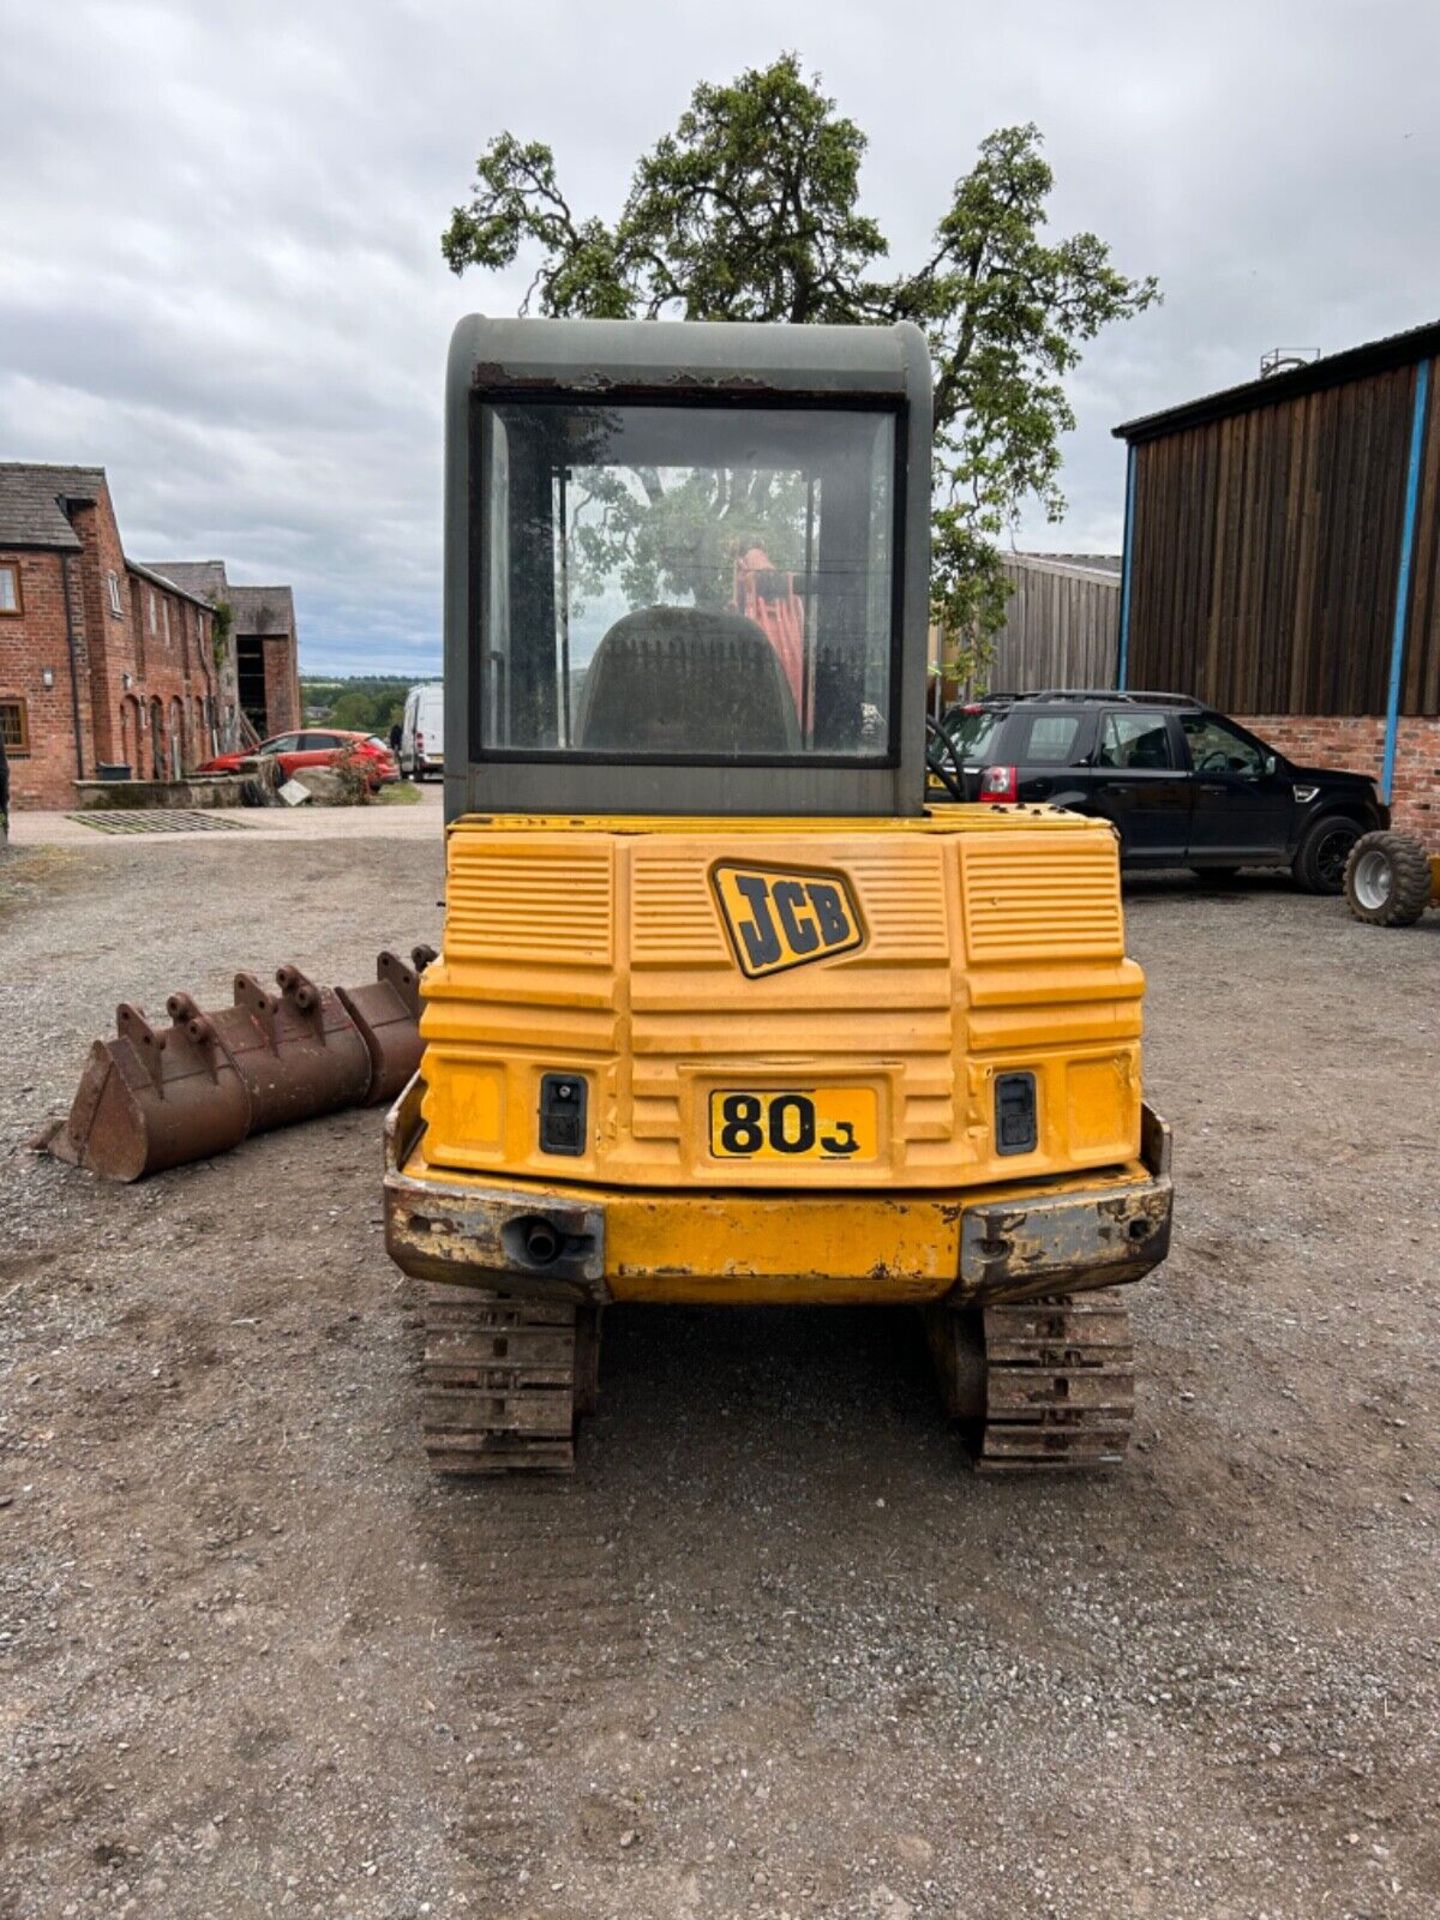 SOLID TRACKS, STRONG DIGGER: 1994 JCB 803 WITH PERKINS ENGINE - Bild 5 aus 14